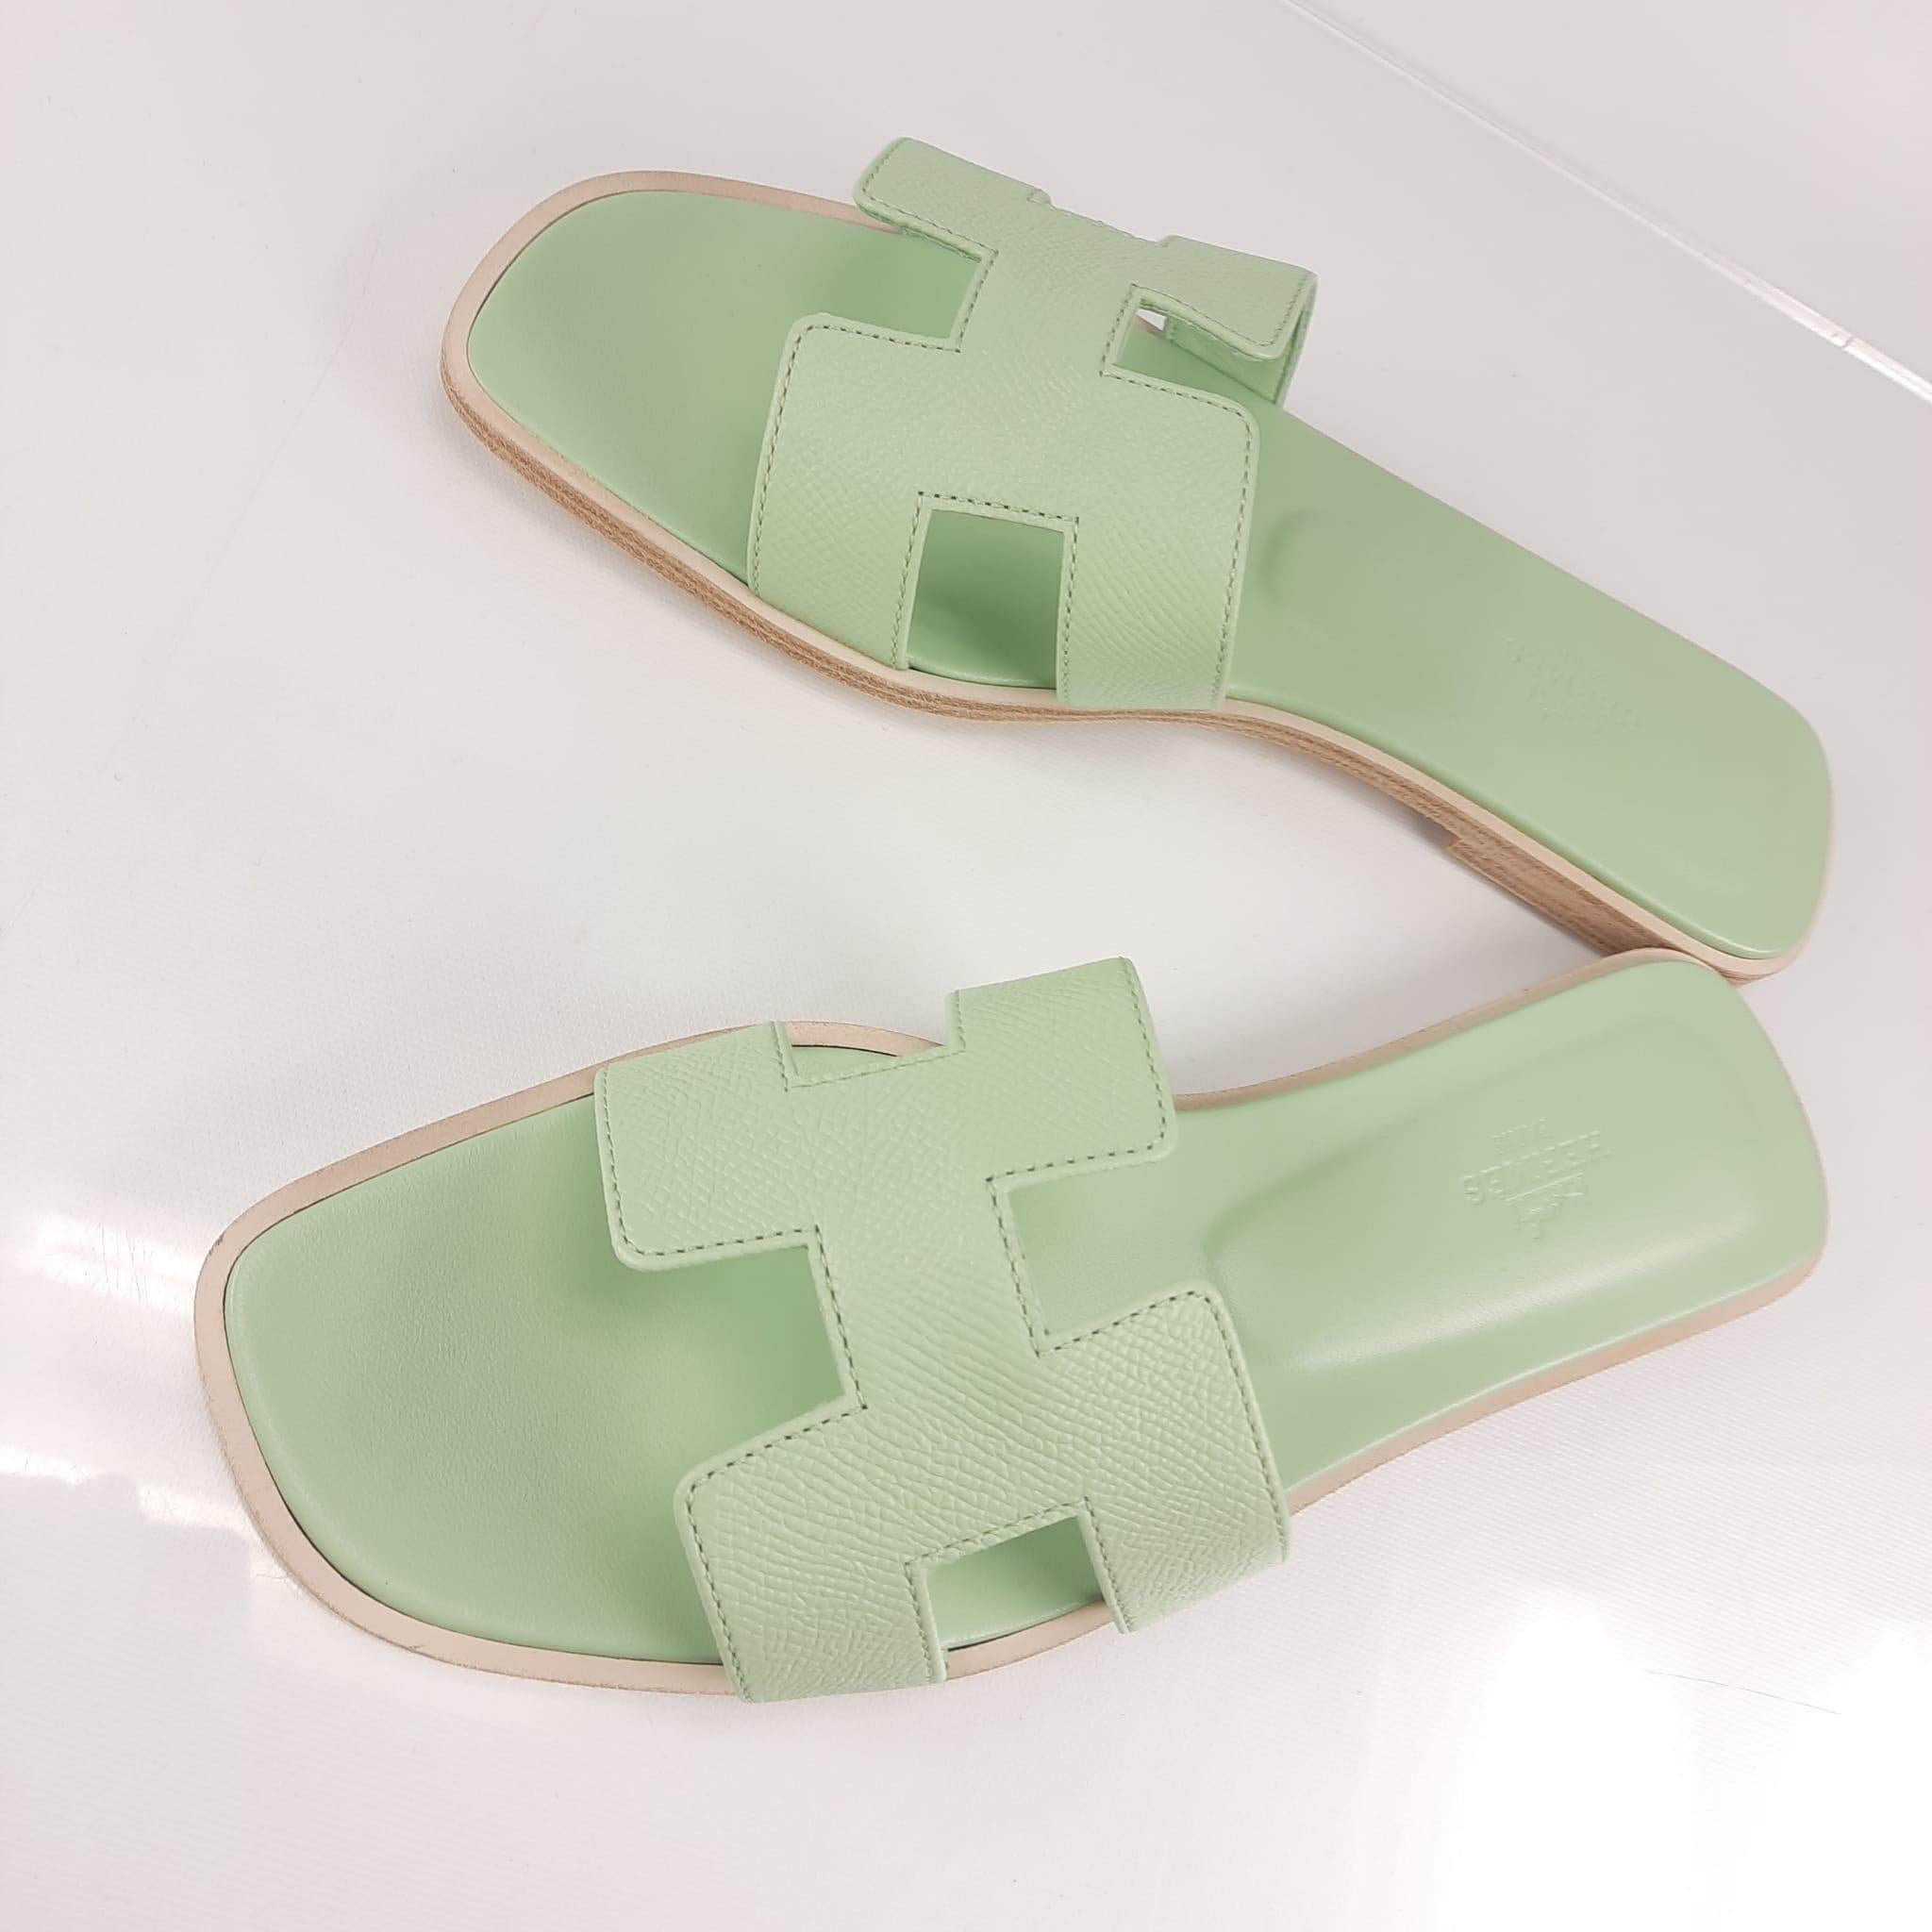 Color Vert Jade Size 36 EU
with iconic 